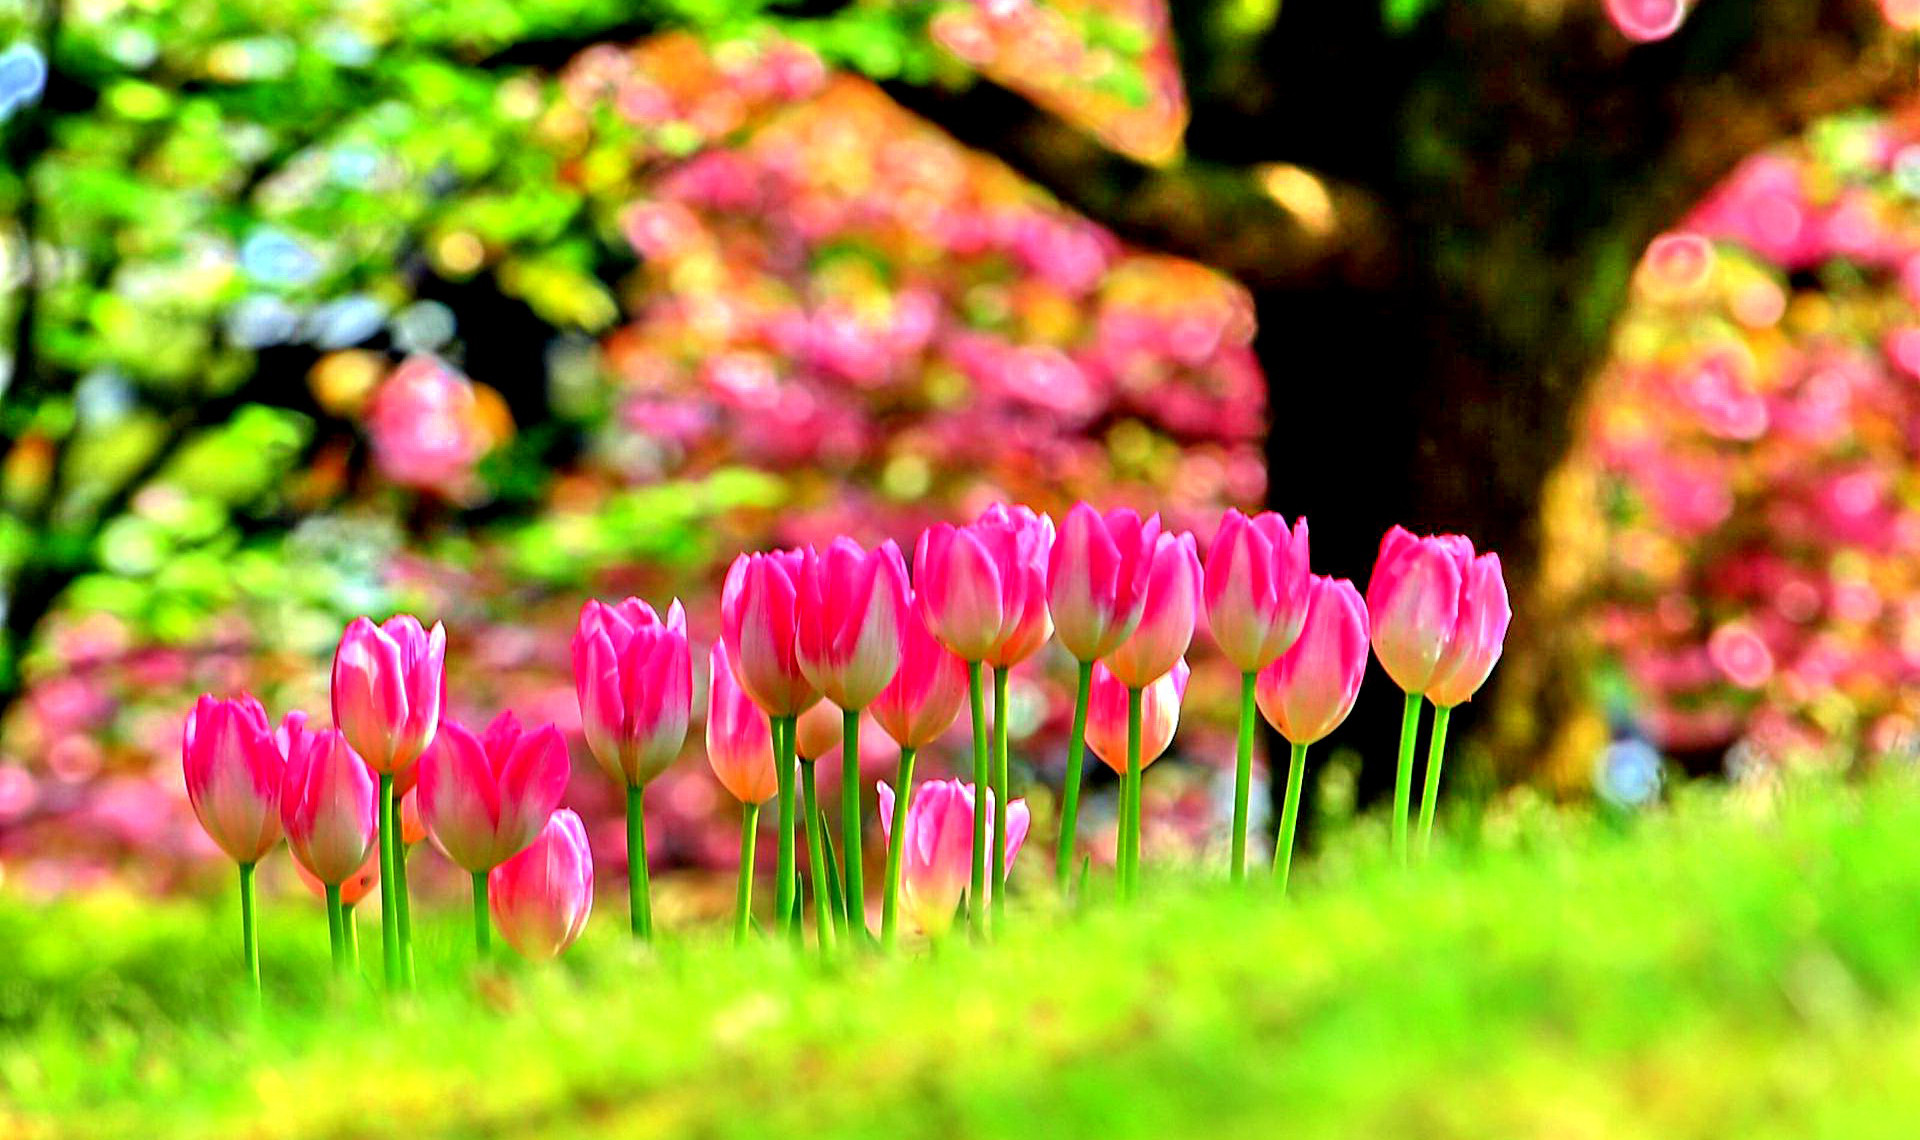 1920x1140 ... Background download Â· Flowers Wallpapers, FHDQ Wallpaper ...